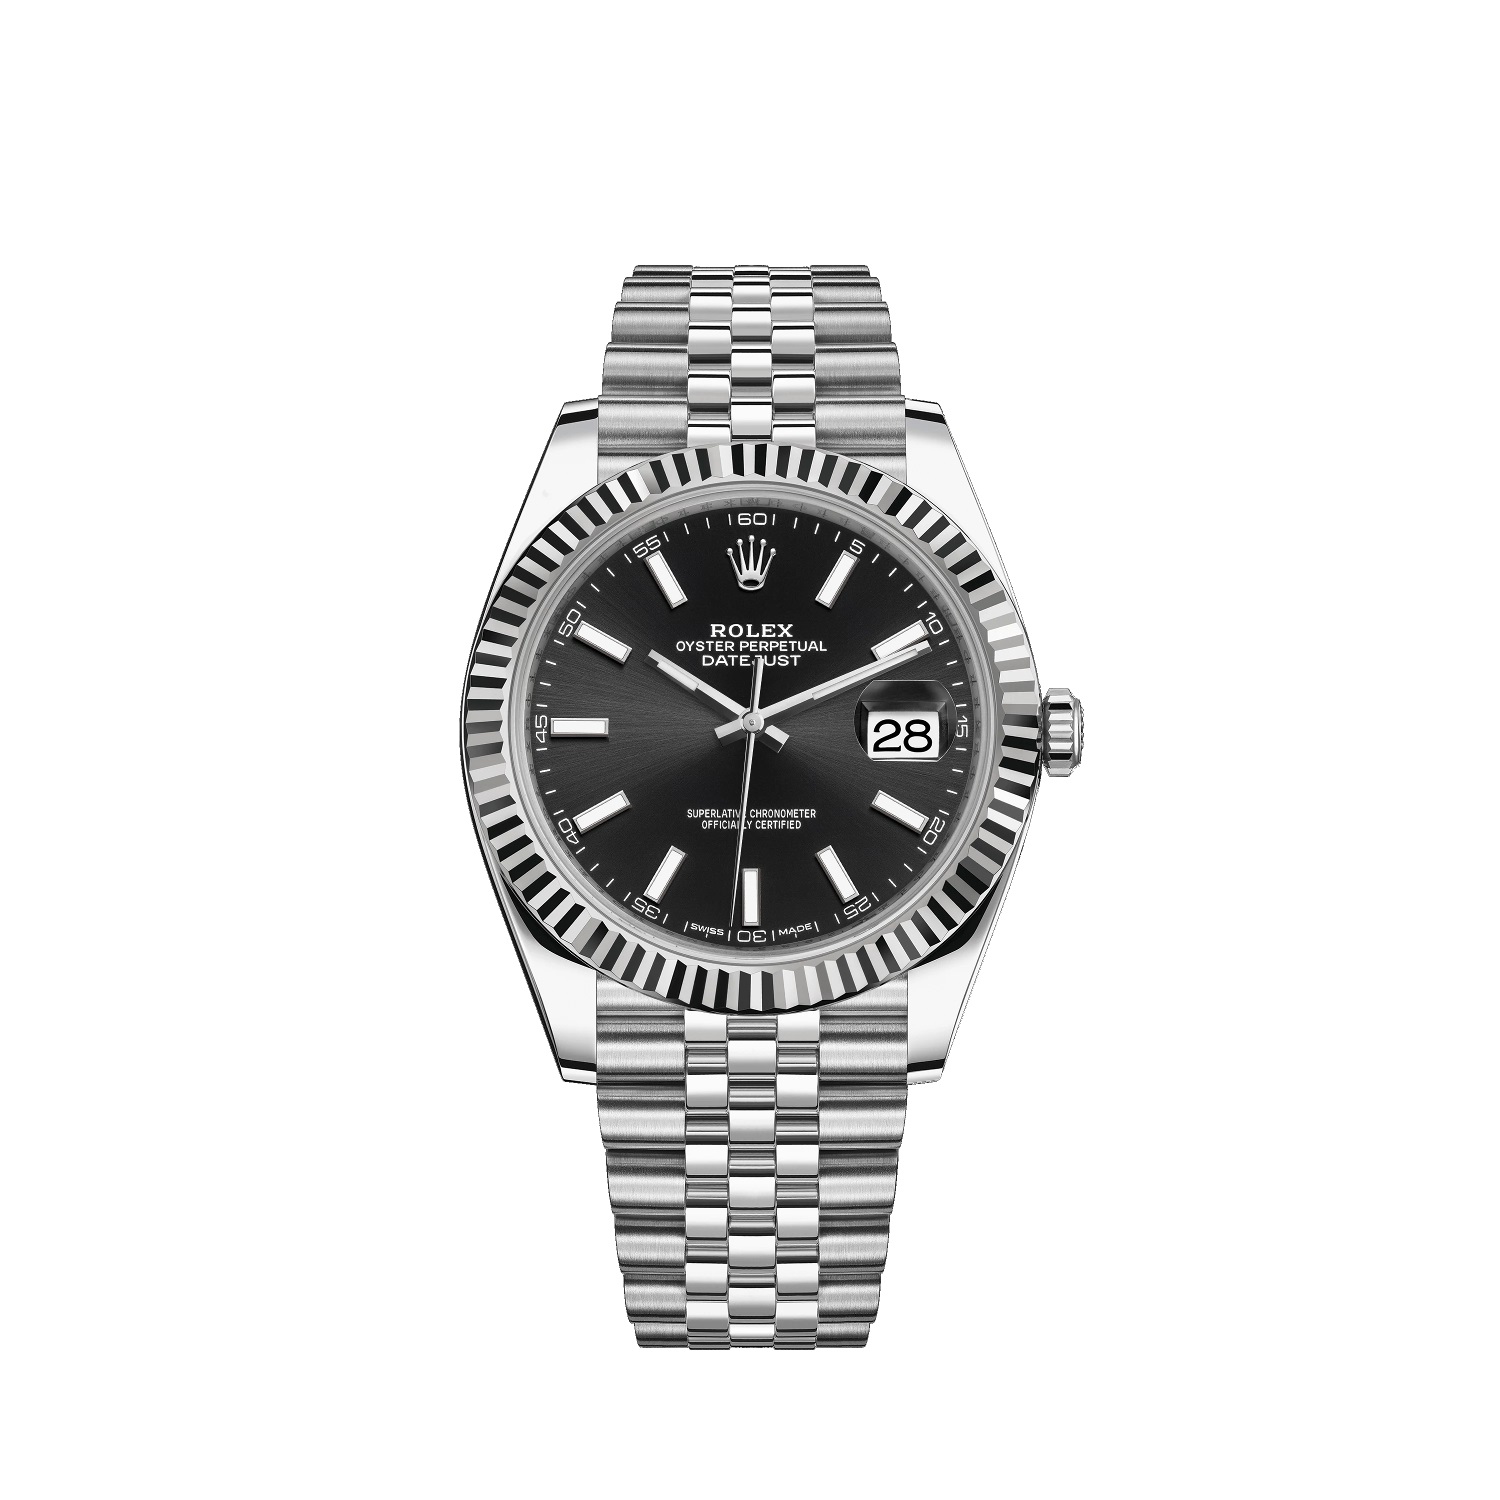 Datejust 41 126334 White Gold & Stainless Steel Watch (Black)